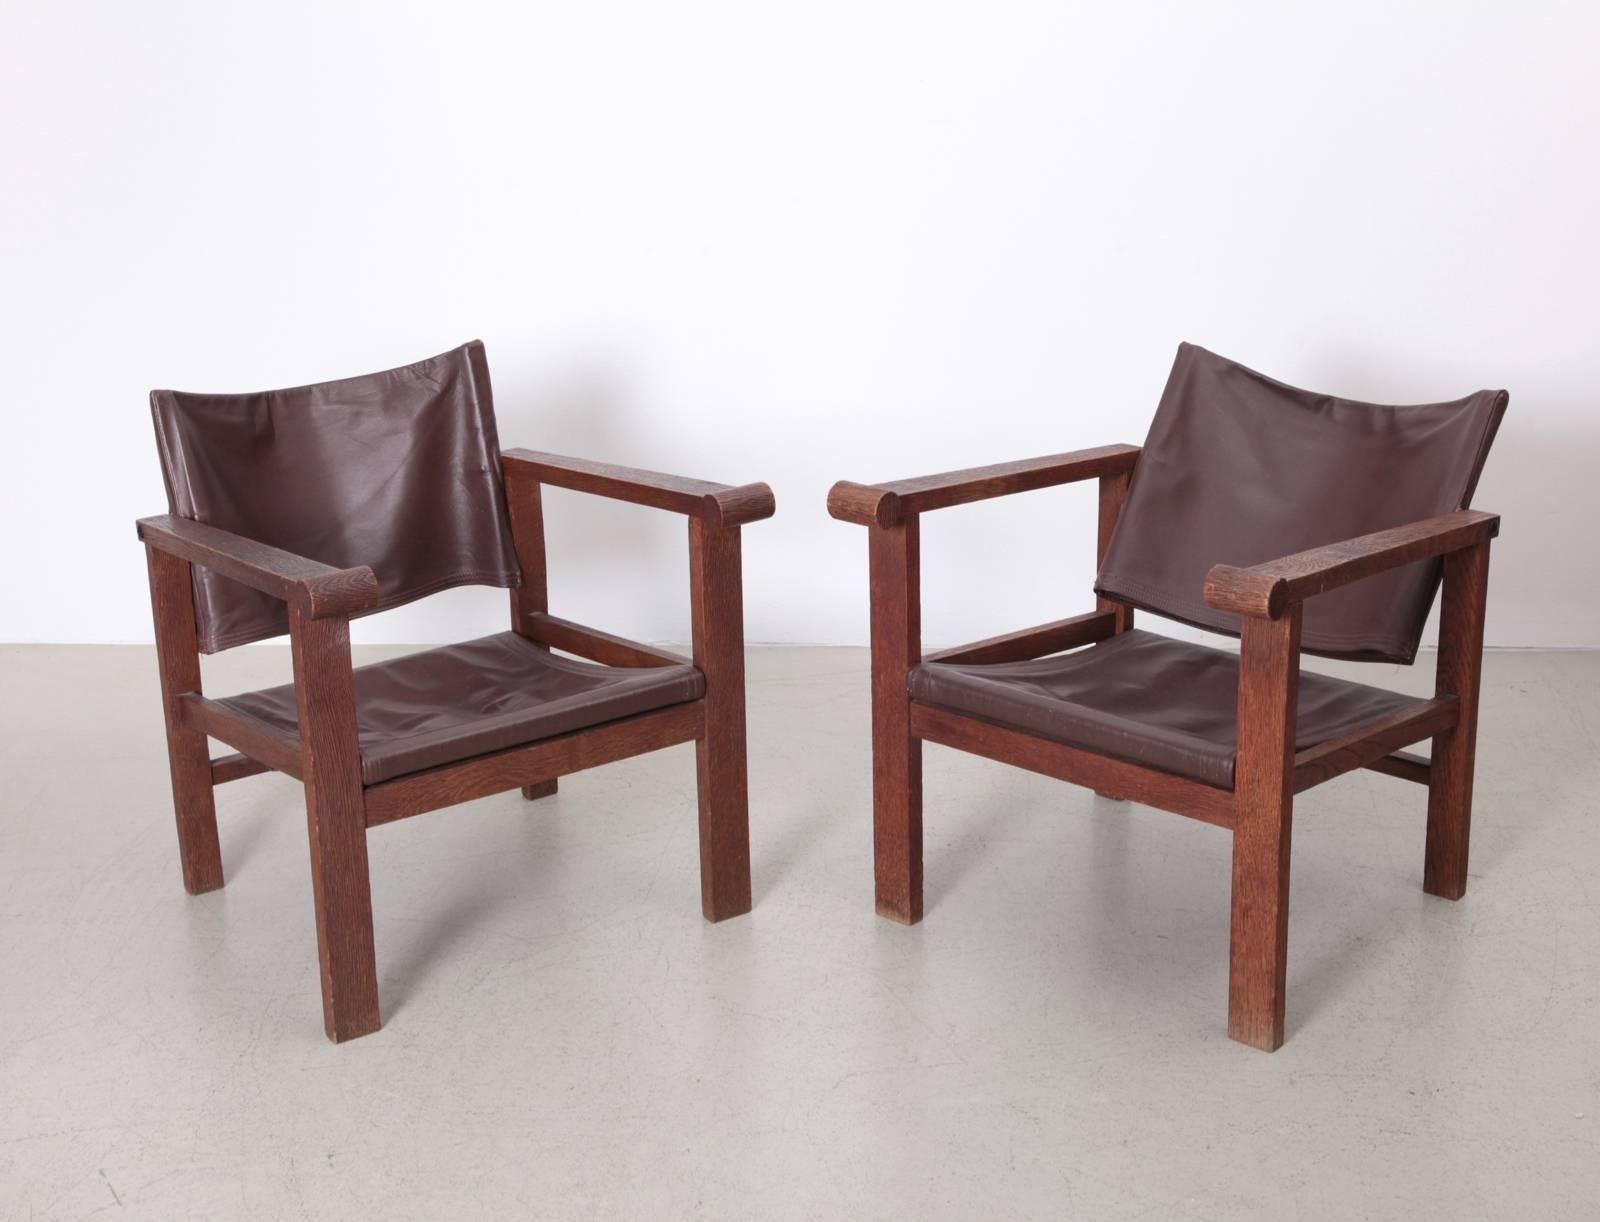 Pair of Art Deco reclining sling back leather lounge chairs. During production, the wooden parts are submitted through a specialized process whereby the wood is dipped into acid in order to soften the fibres of the wood. Softened fibres are then